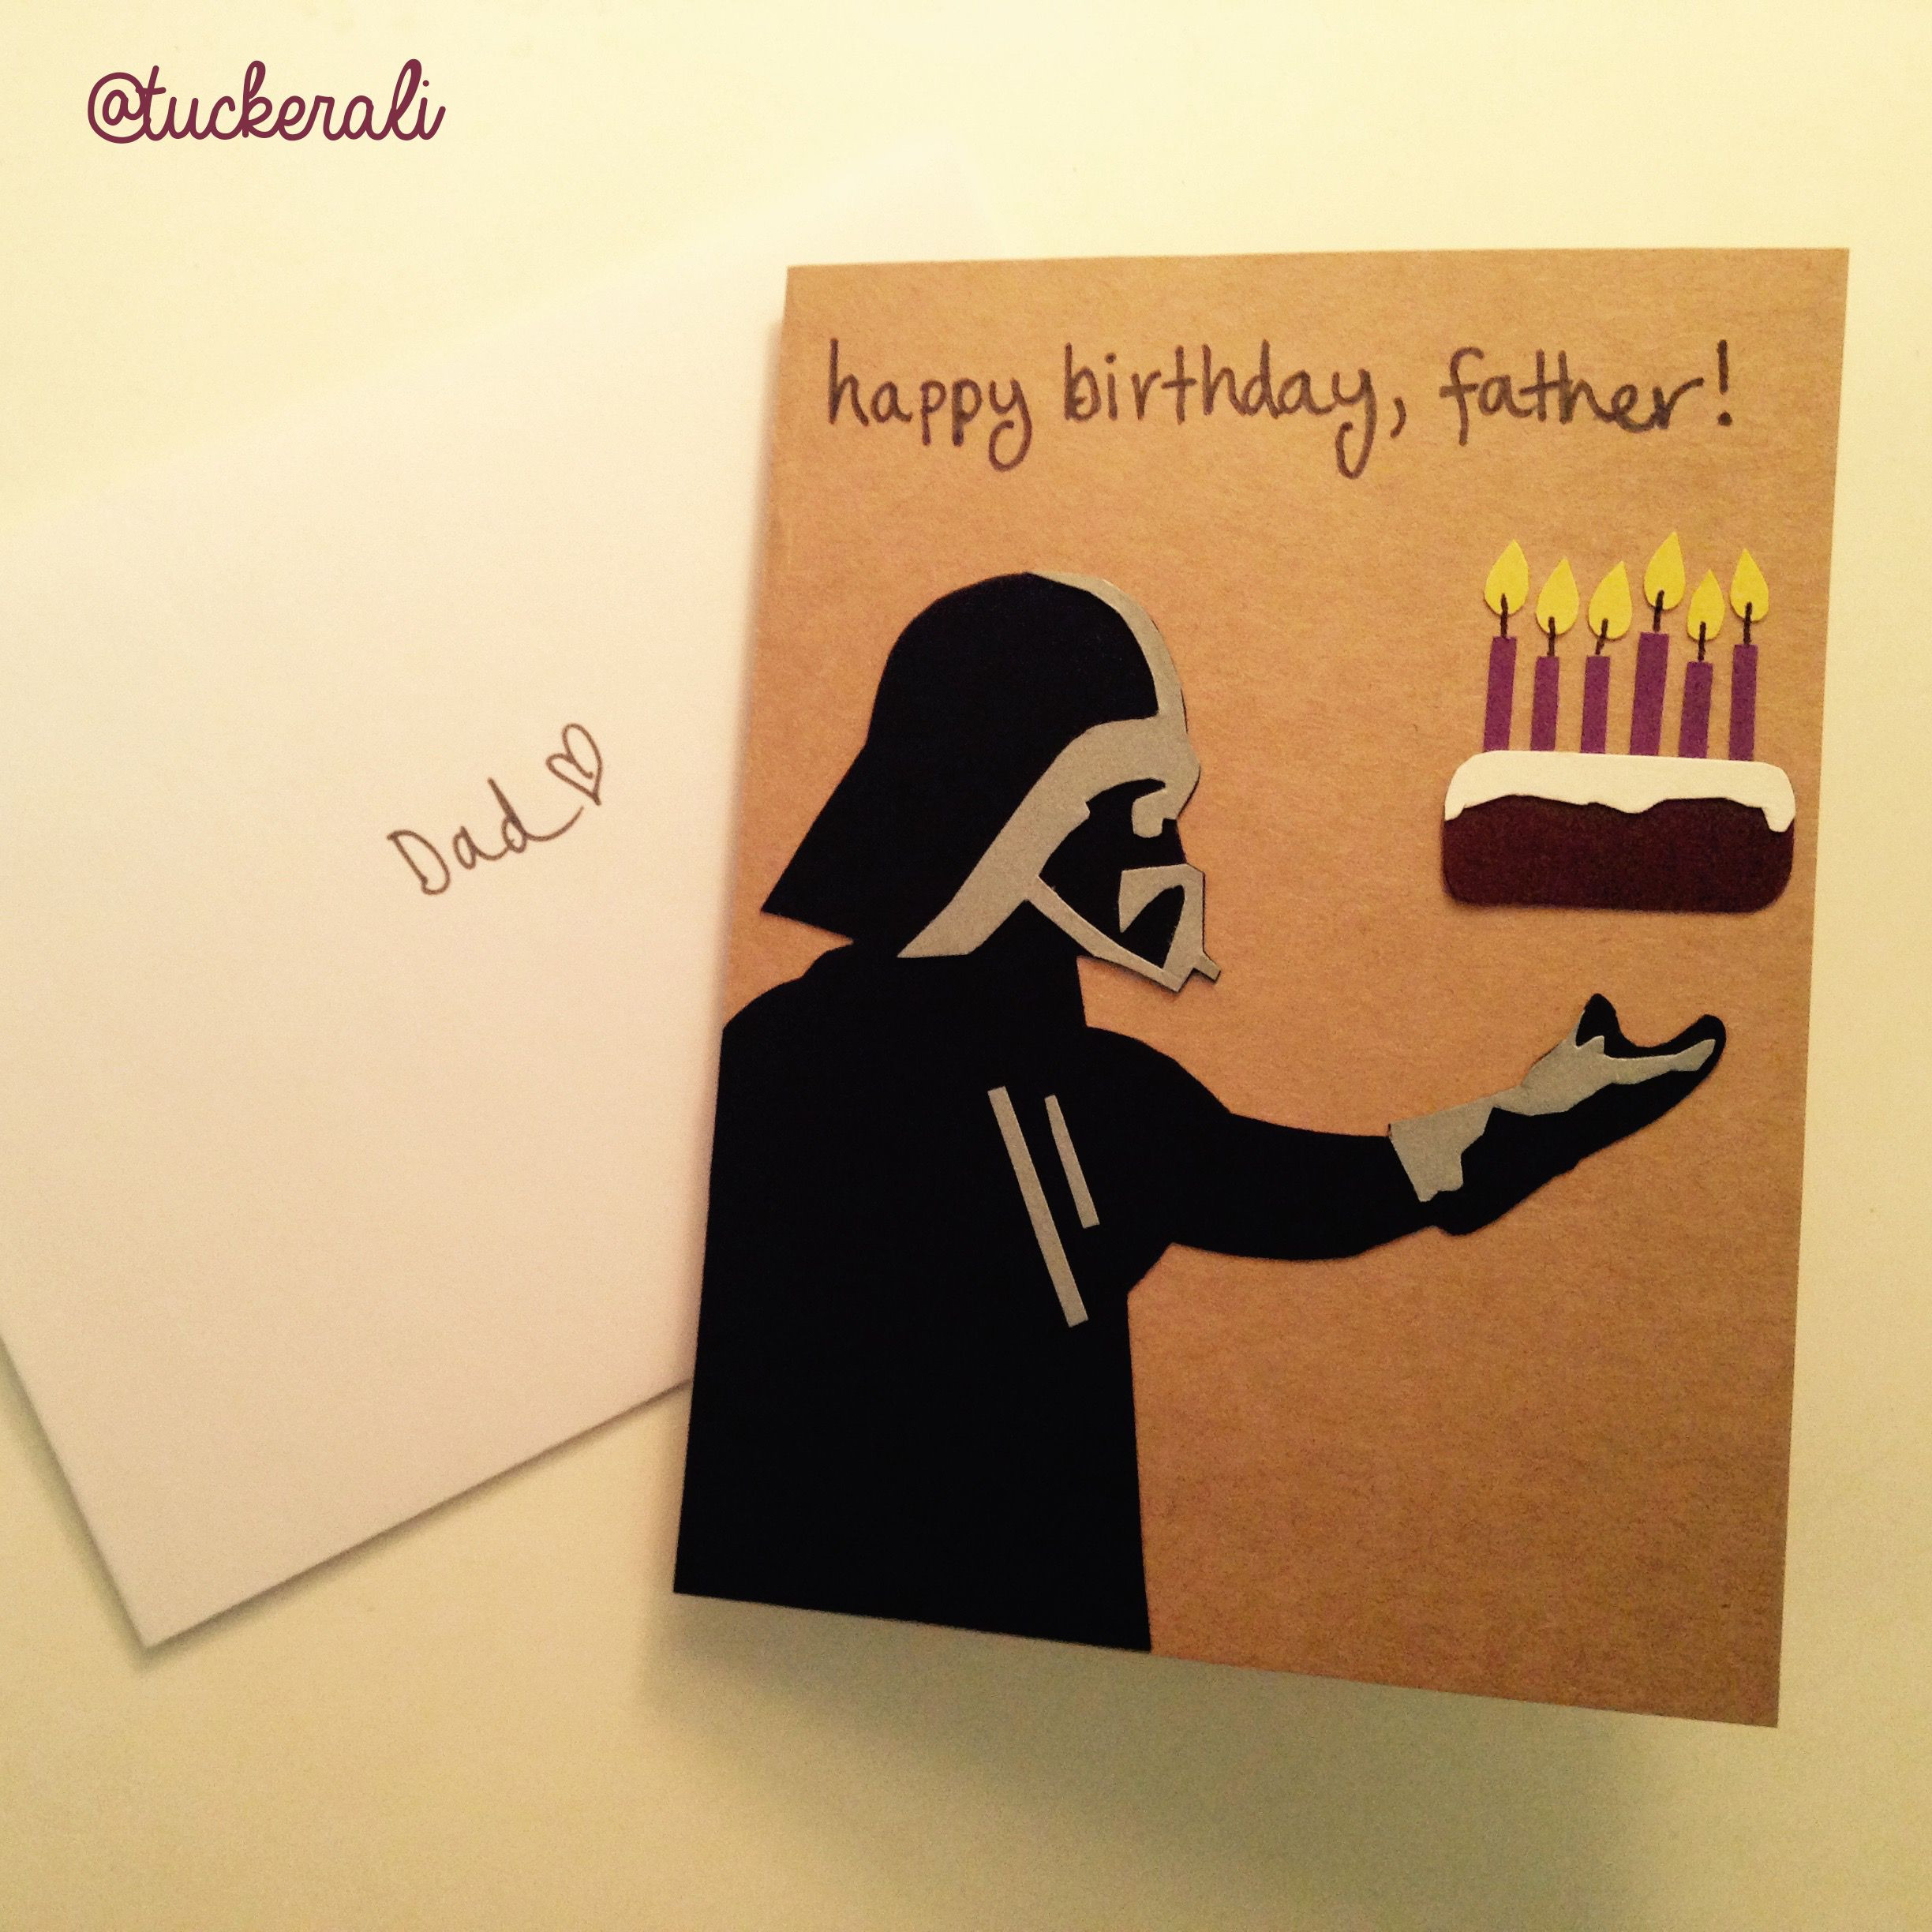 Handmade Birthday Card Ideas For Father Handmade Birthday Card Ideas This Was A Super Cute Idea I M Sure My